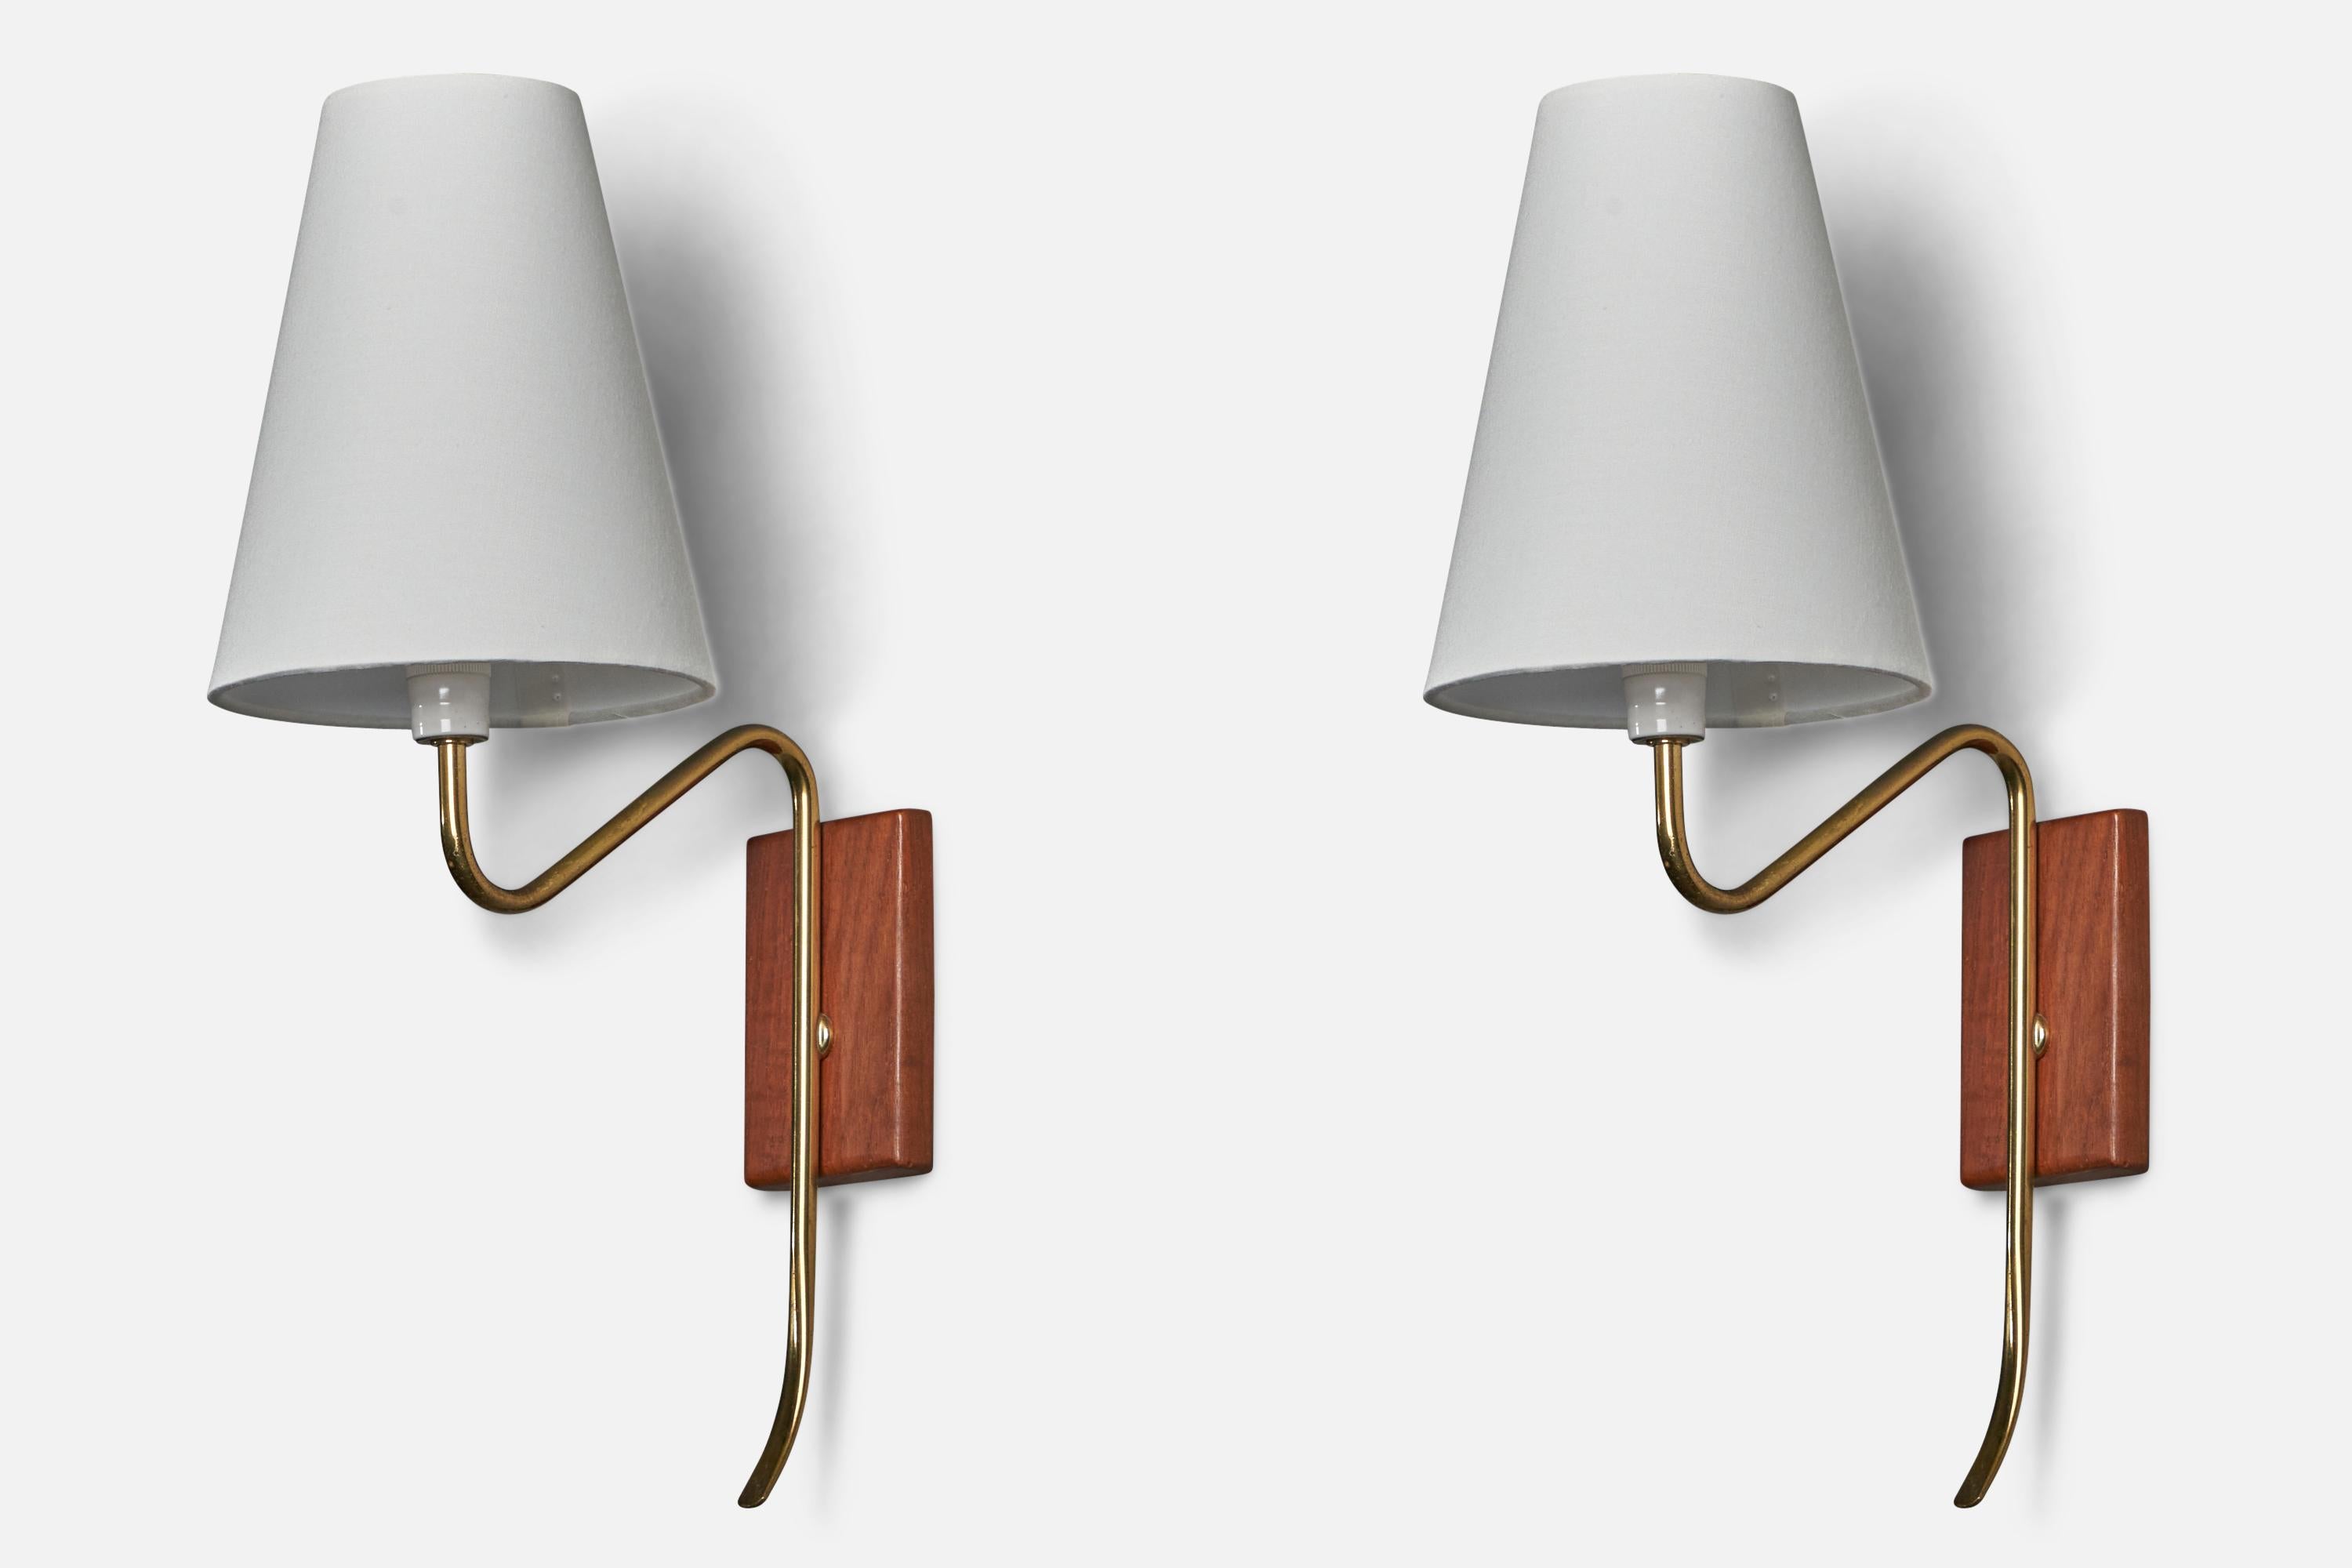 A pair of brass, teak and white fabric wall lights designed and produced in Sweden, 1950s.

Overall Dimensions (inches): 16